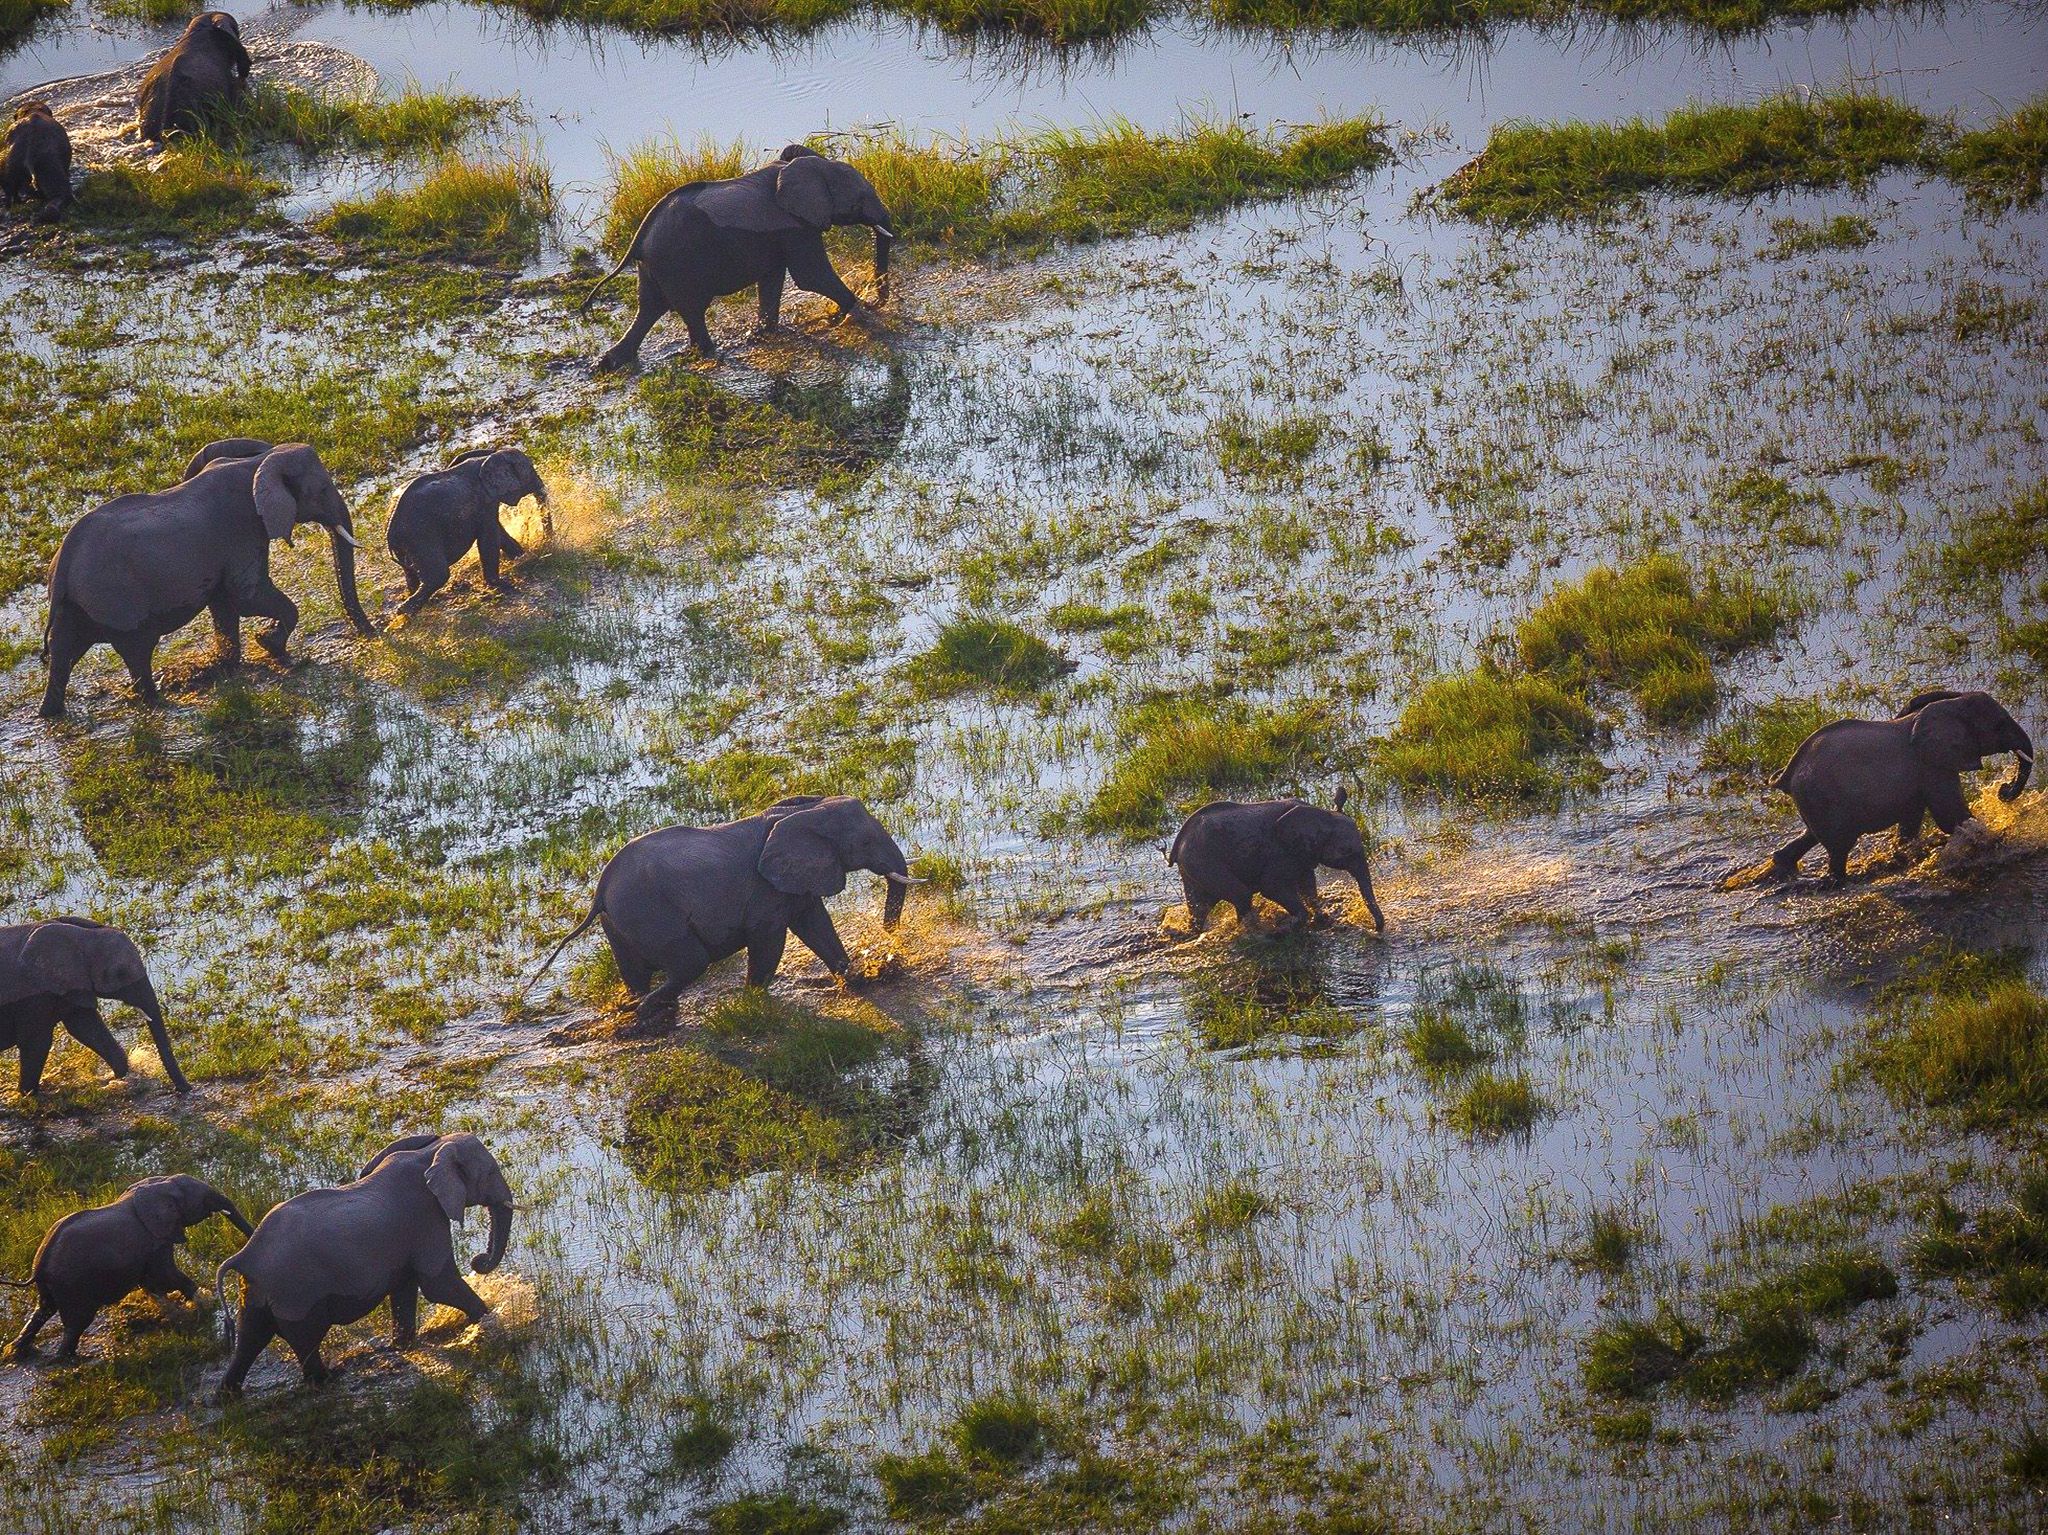 Botswana:  A group of elephants in the Okavango Delta wades through water that floods the delta... [Photo of the day - January 2019]